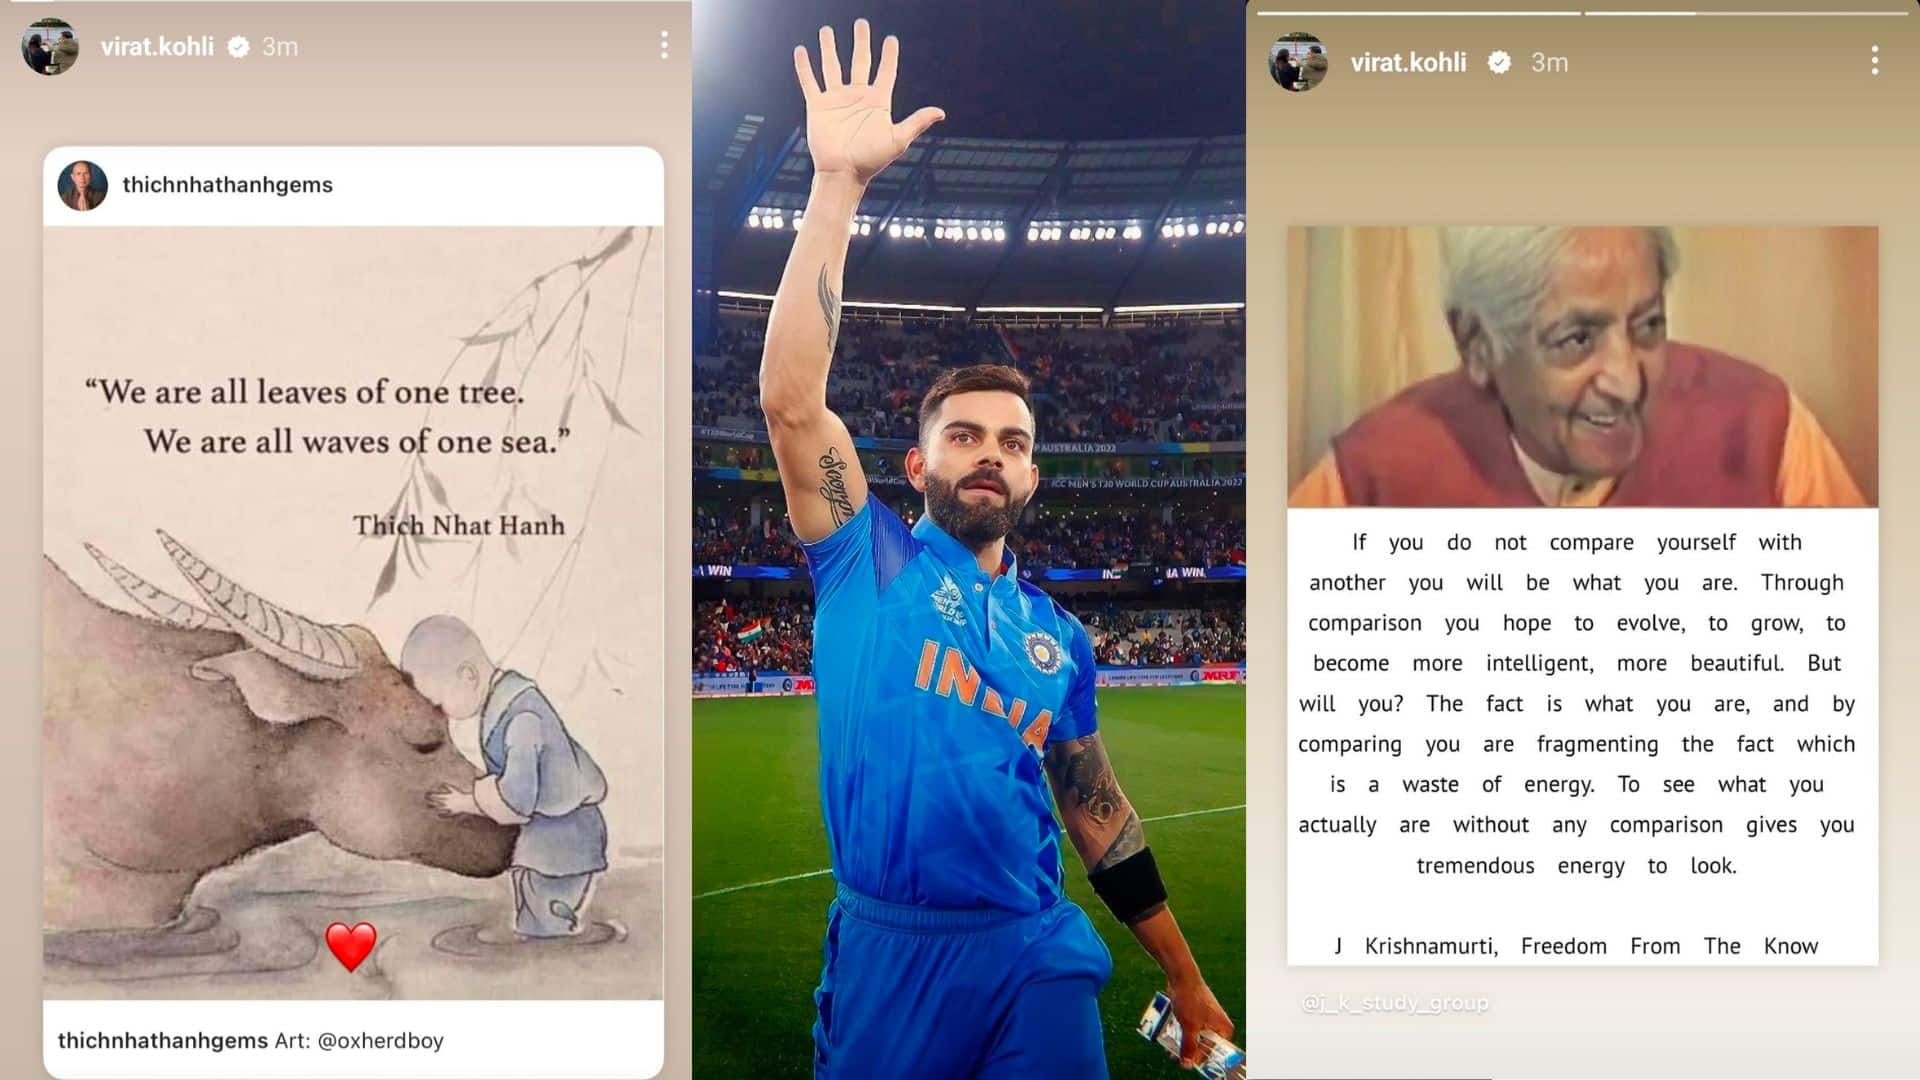 Virat Kohli Comes Up With Another Cryptic Message On Instagram Ahead Of West Indies Tests